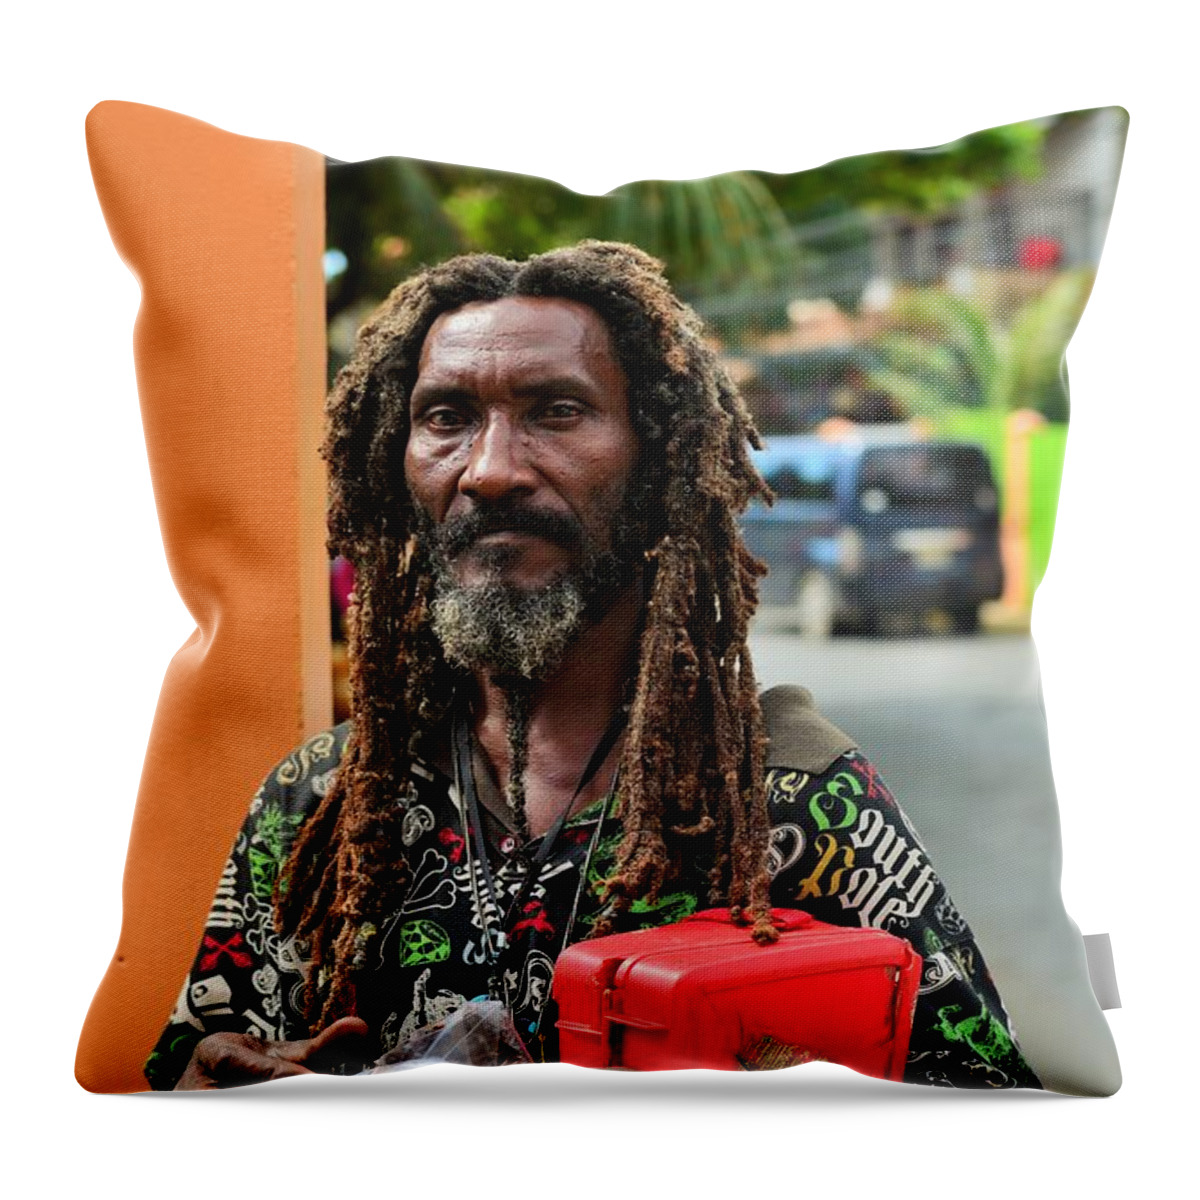 Portrait Throw Pillow featuring the photograph Roatan People #25 by Giovanni Bussu